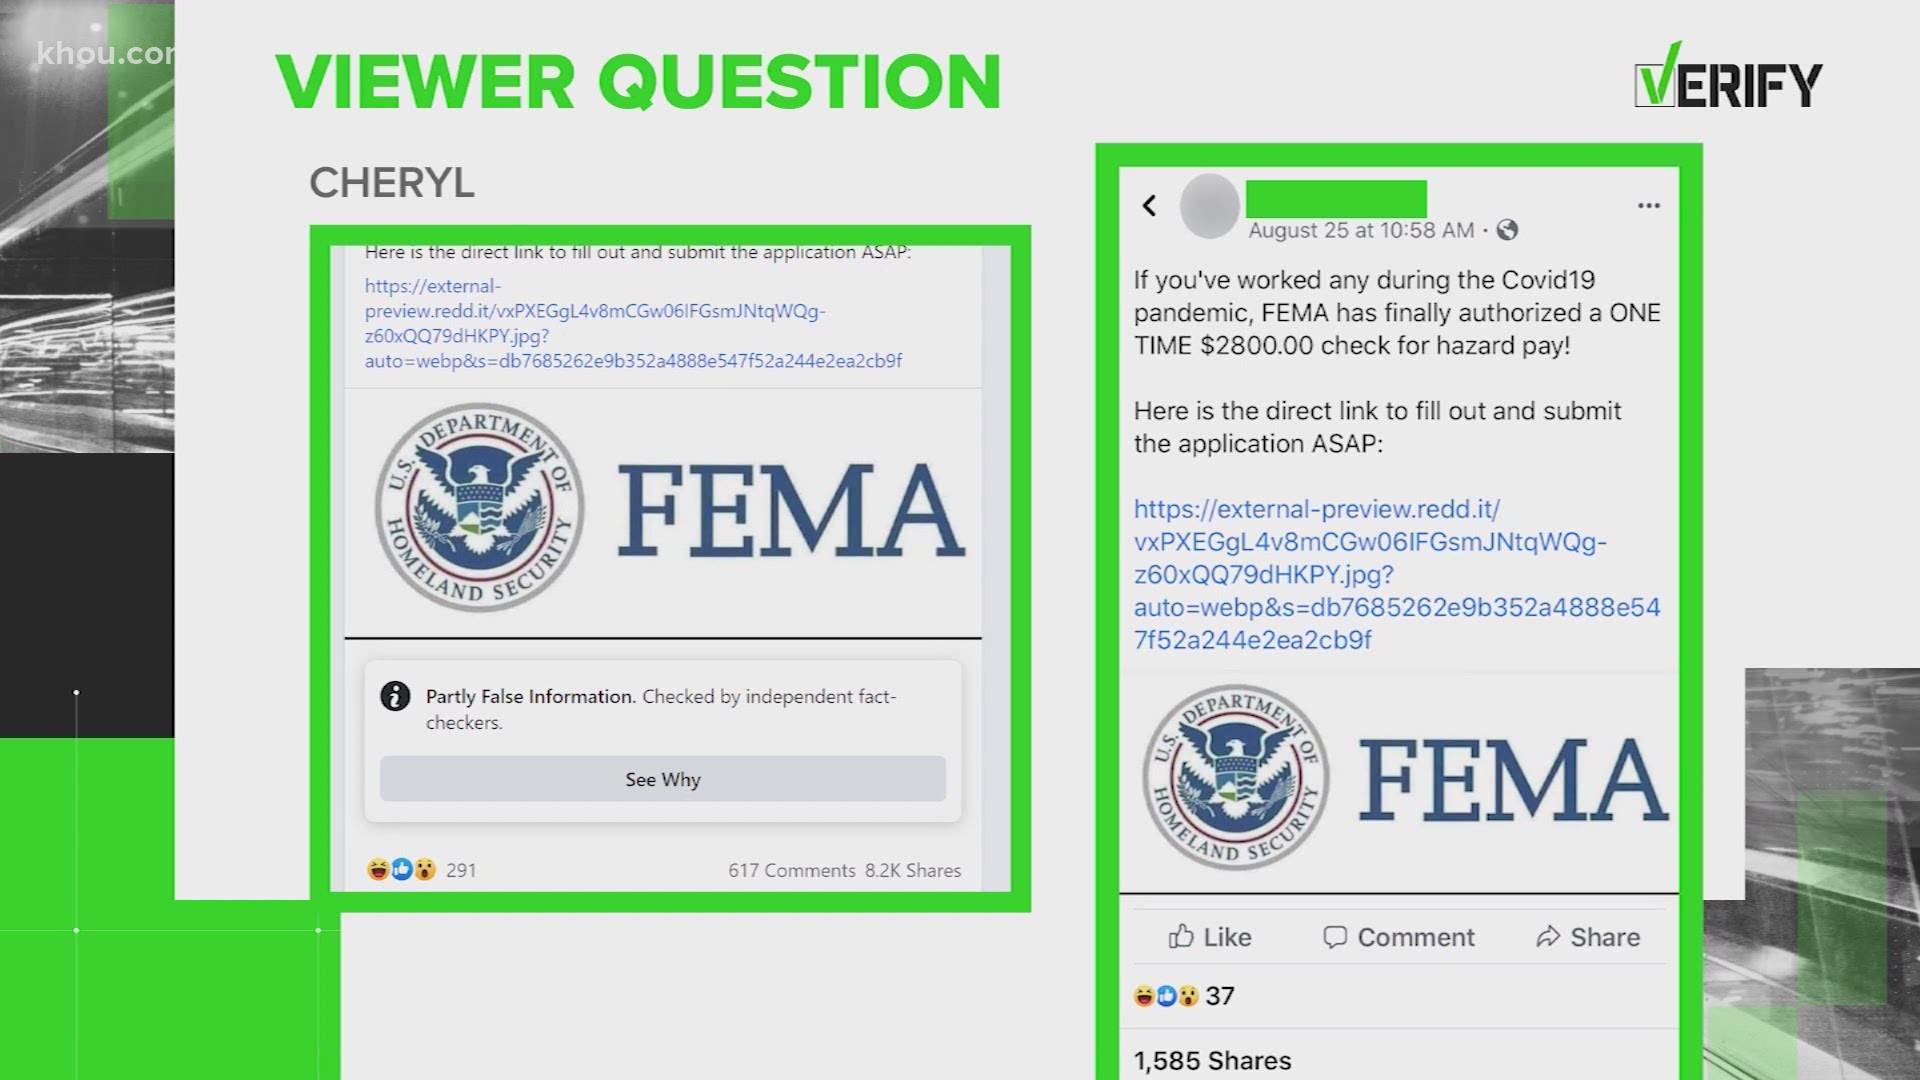 Our VERIFY Team dug into the question and found out that FEMA isn't mailing out hazard pay checks if you worked during the pandemic.